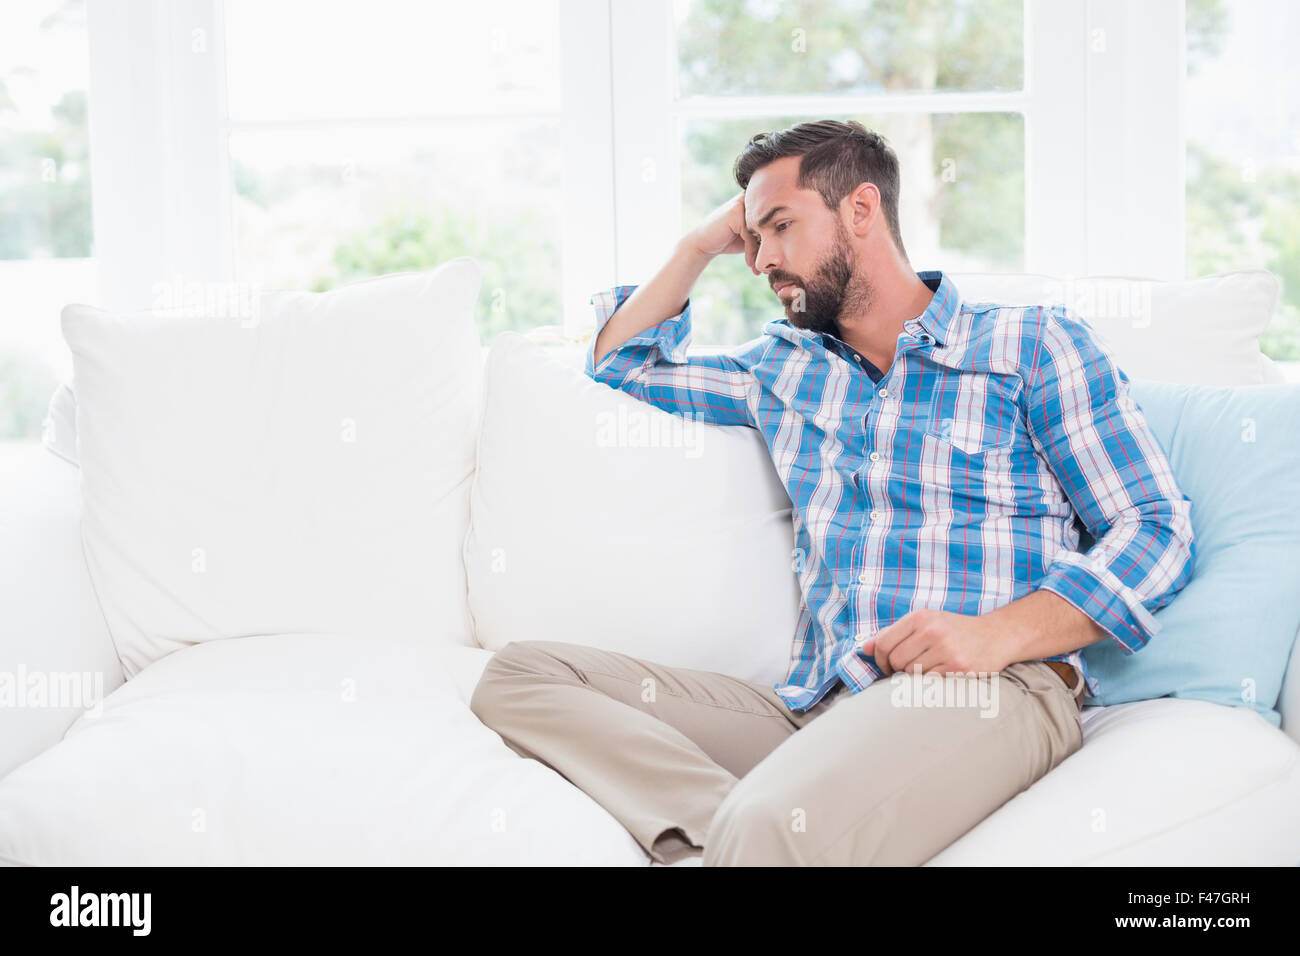 Unhappy man suffering from migraine Stock Photo